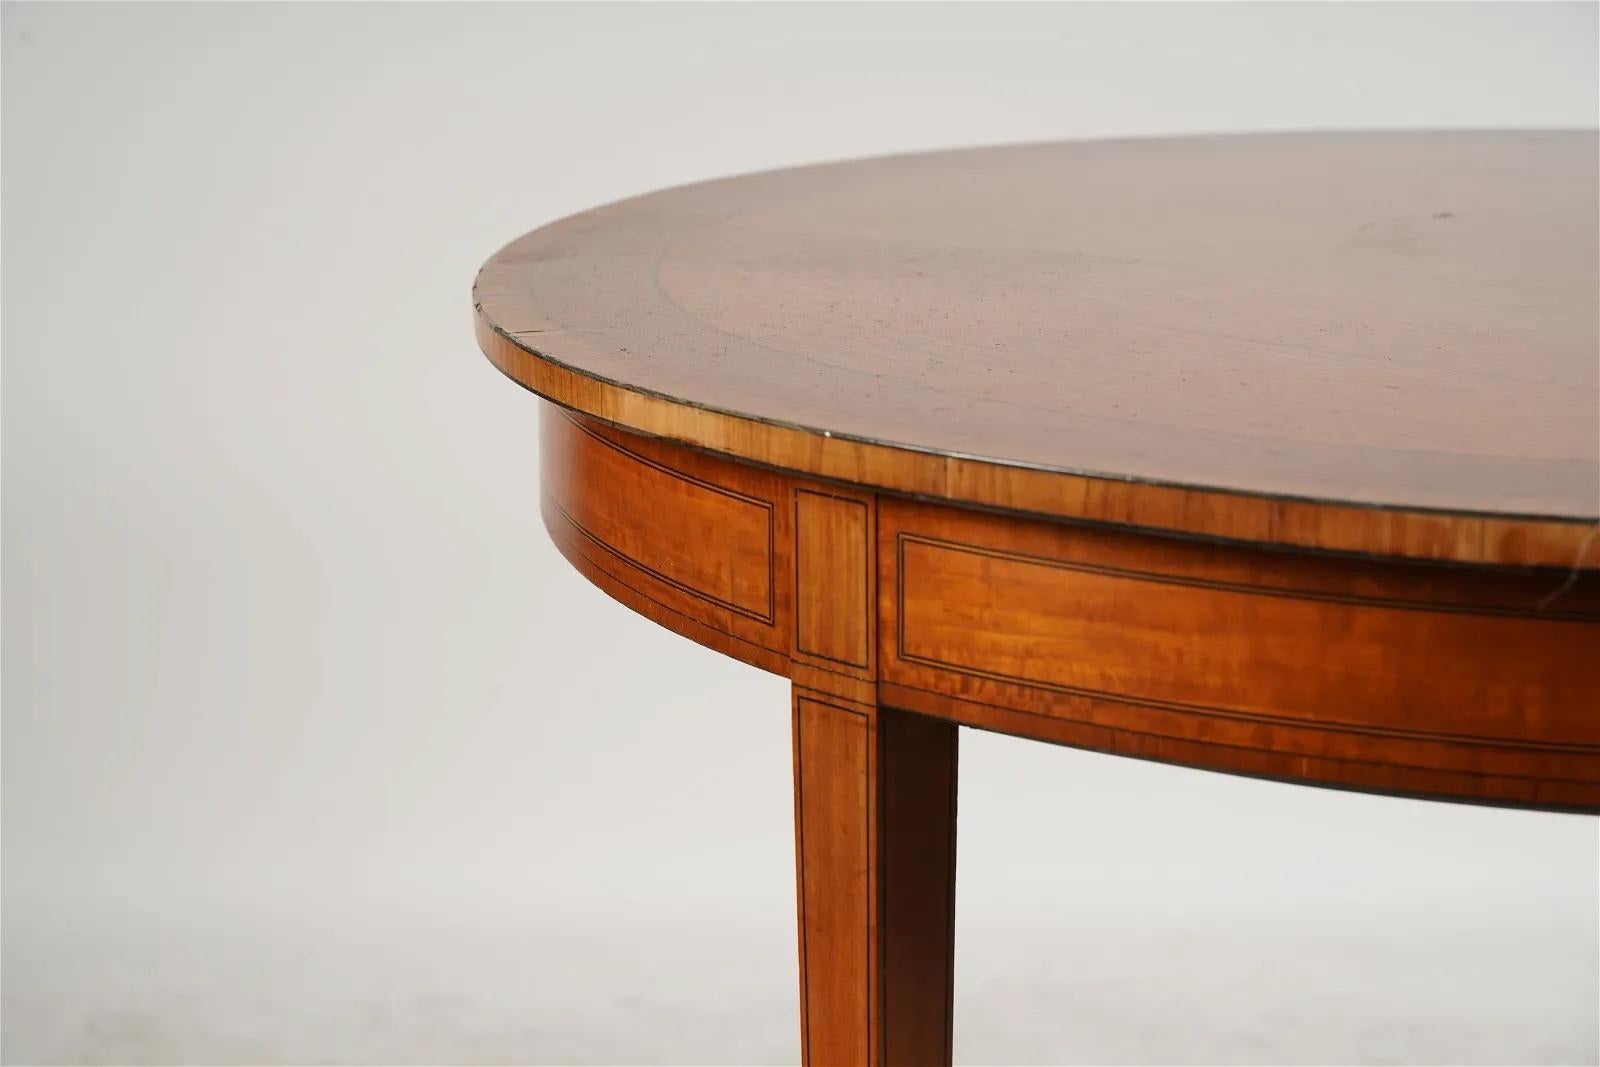 British Antique Edwardian Inlaid Marquetry Satinwood Center / Side Table Circa 1900 For Sale